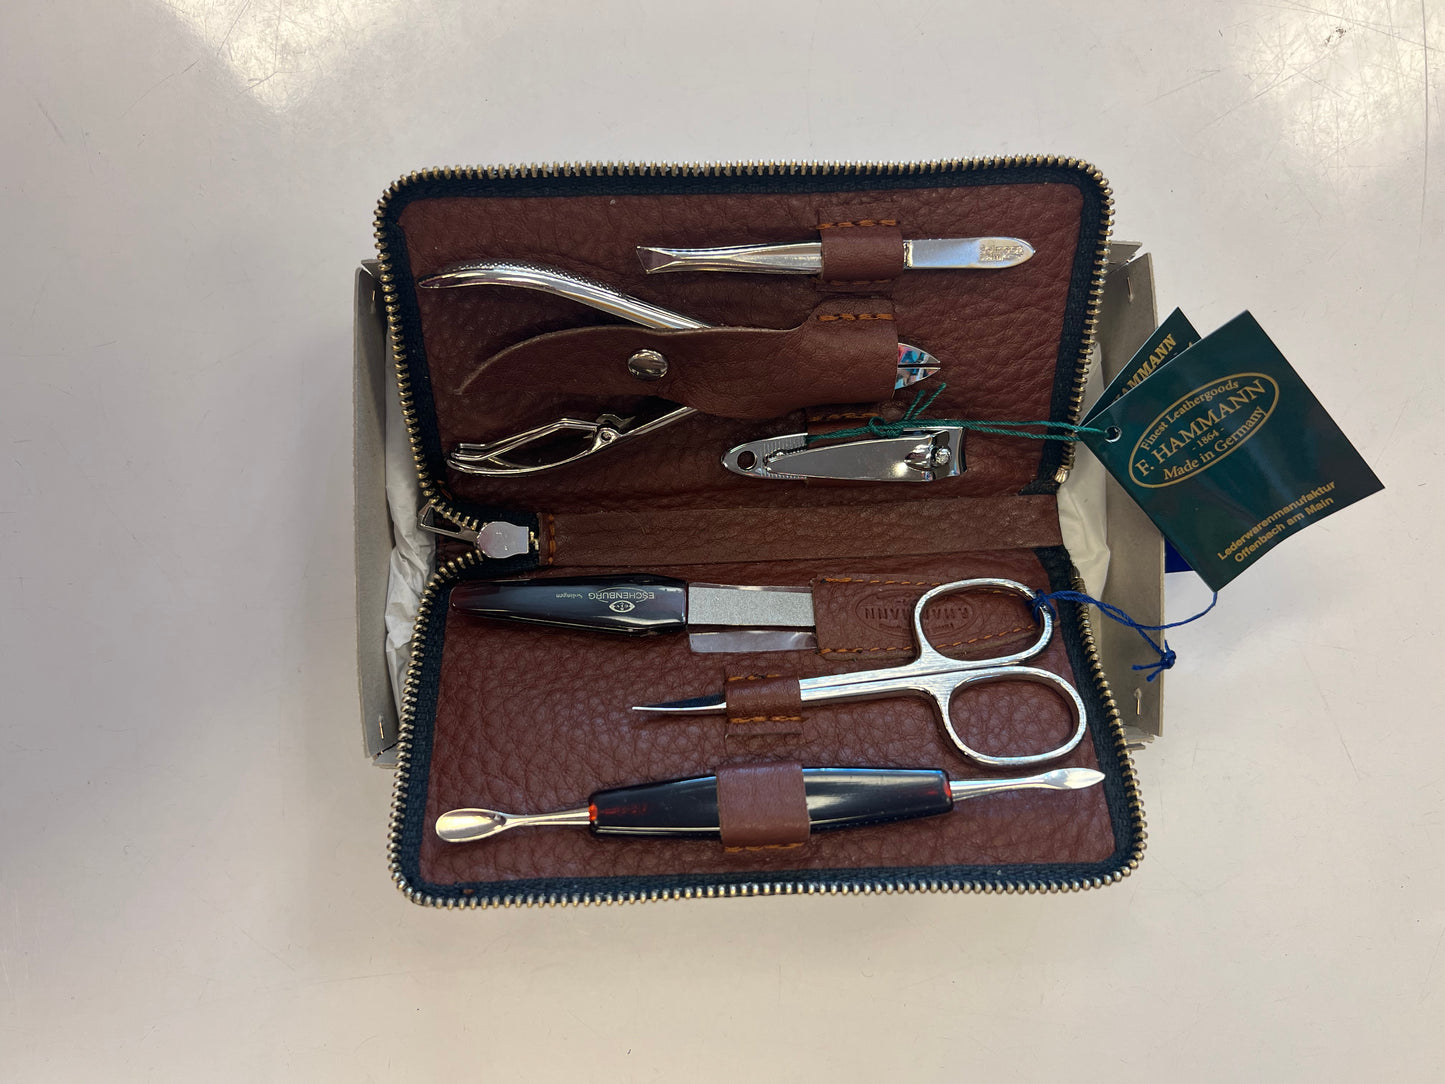 F. Hammann Finest Leather Goods Gaucho Manicure Set (made in Germany)